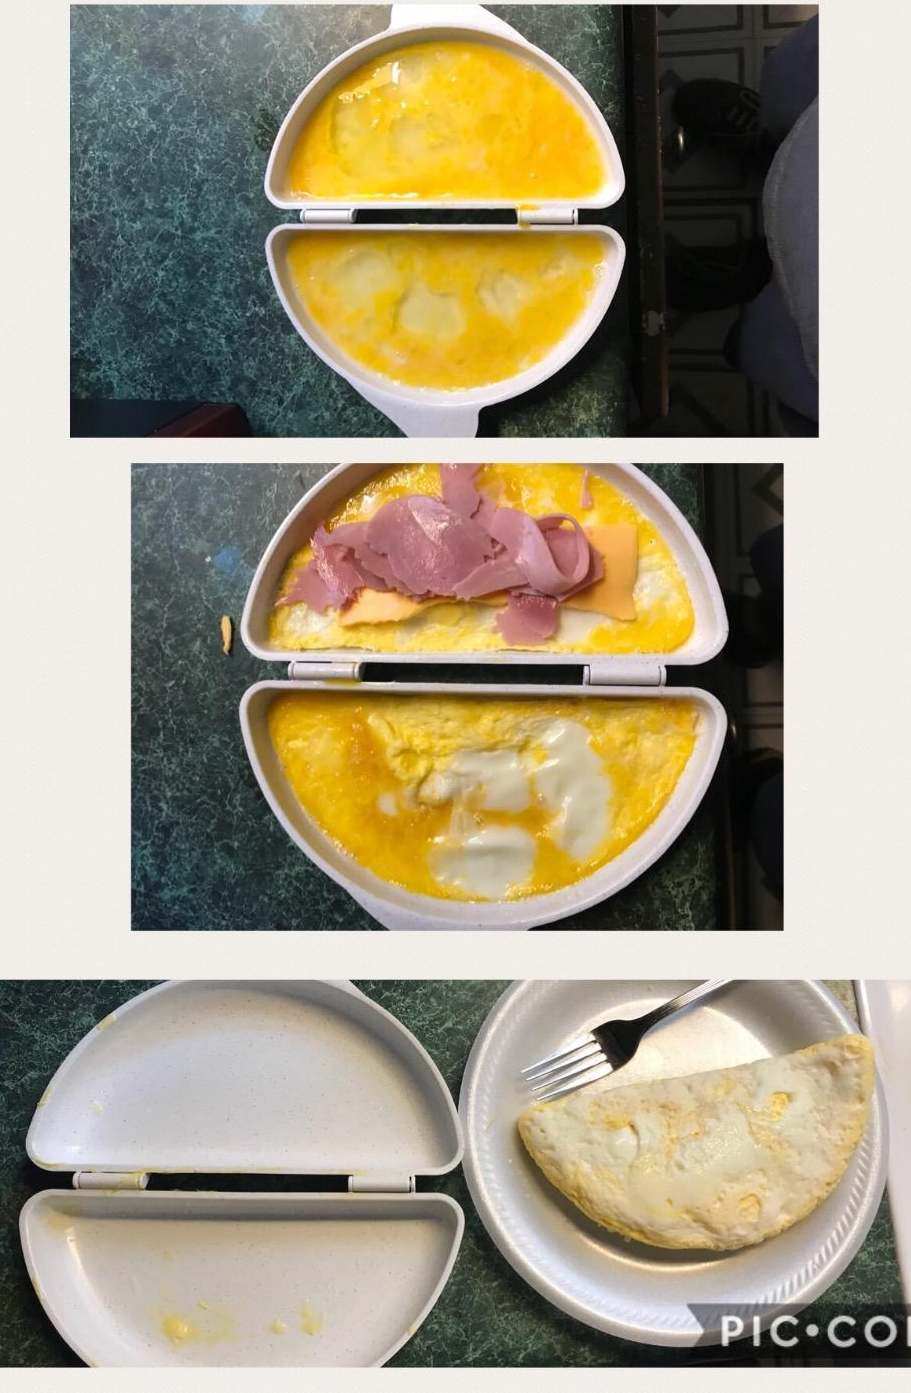 The omelet maker with fresh egg yolks; the omelet maker with a half-cooked omelet, with ham and cheese added; and a finished omelet